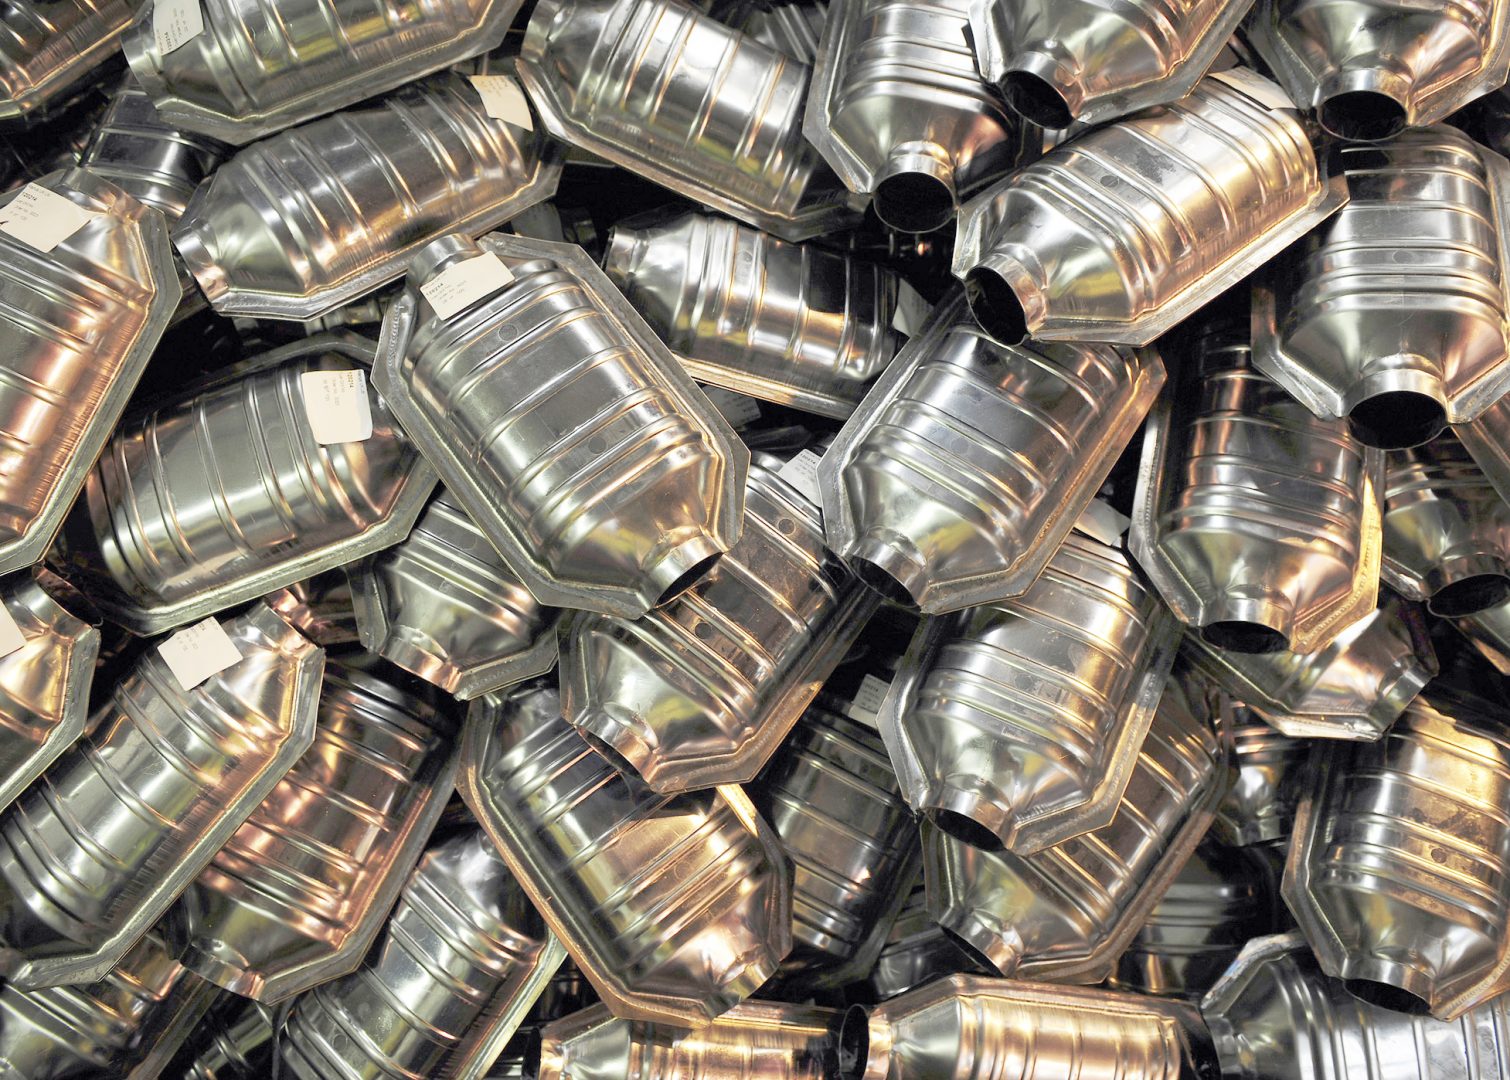 Klarius has started the New Year by re-introducing a large portion of the company’s extensive catalogue of premium quality Catalytic Converters. The list of part numbers includes around 70% of the company’s most popular products, all manufactured in the U